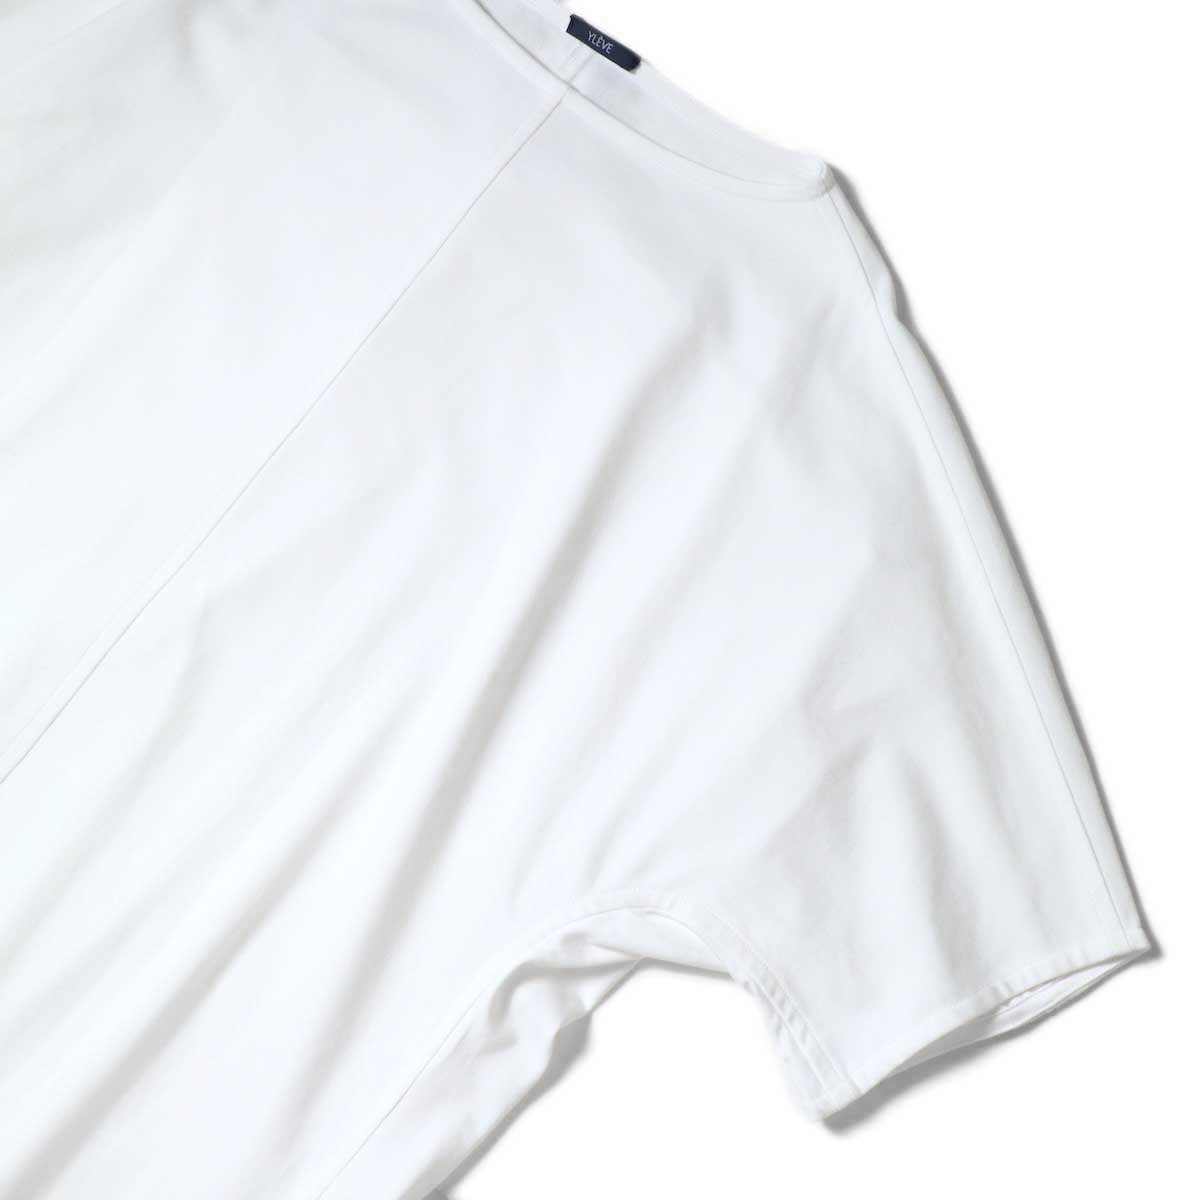 YLEVE / ORGANIC COTTON HIGH COUNT JERSEY OP (White) ドルマンスリーブ